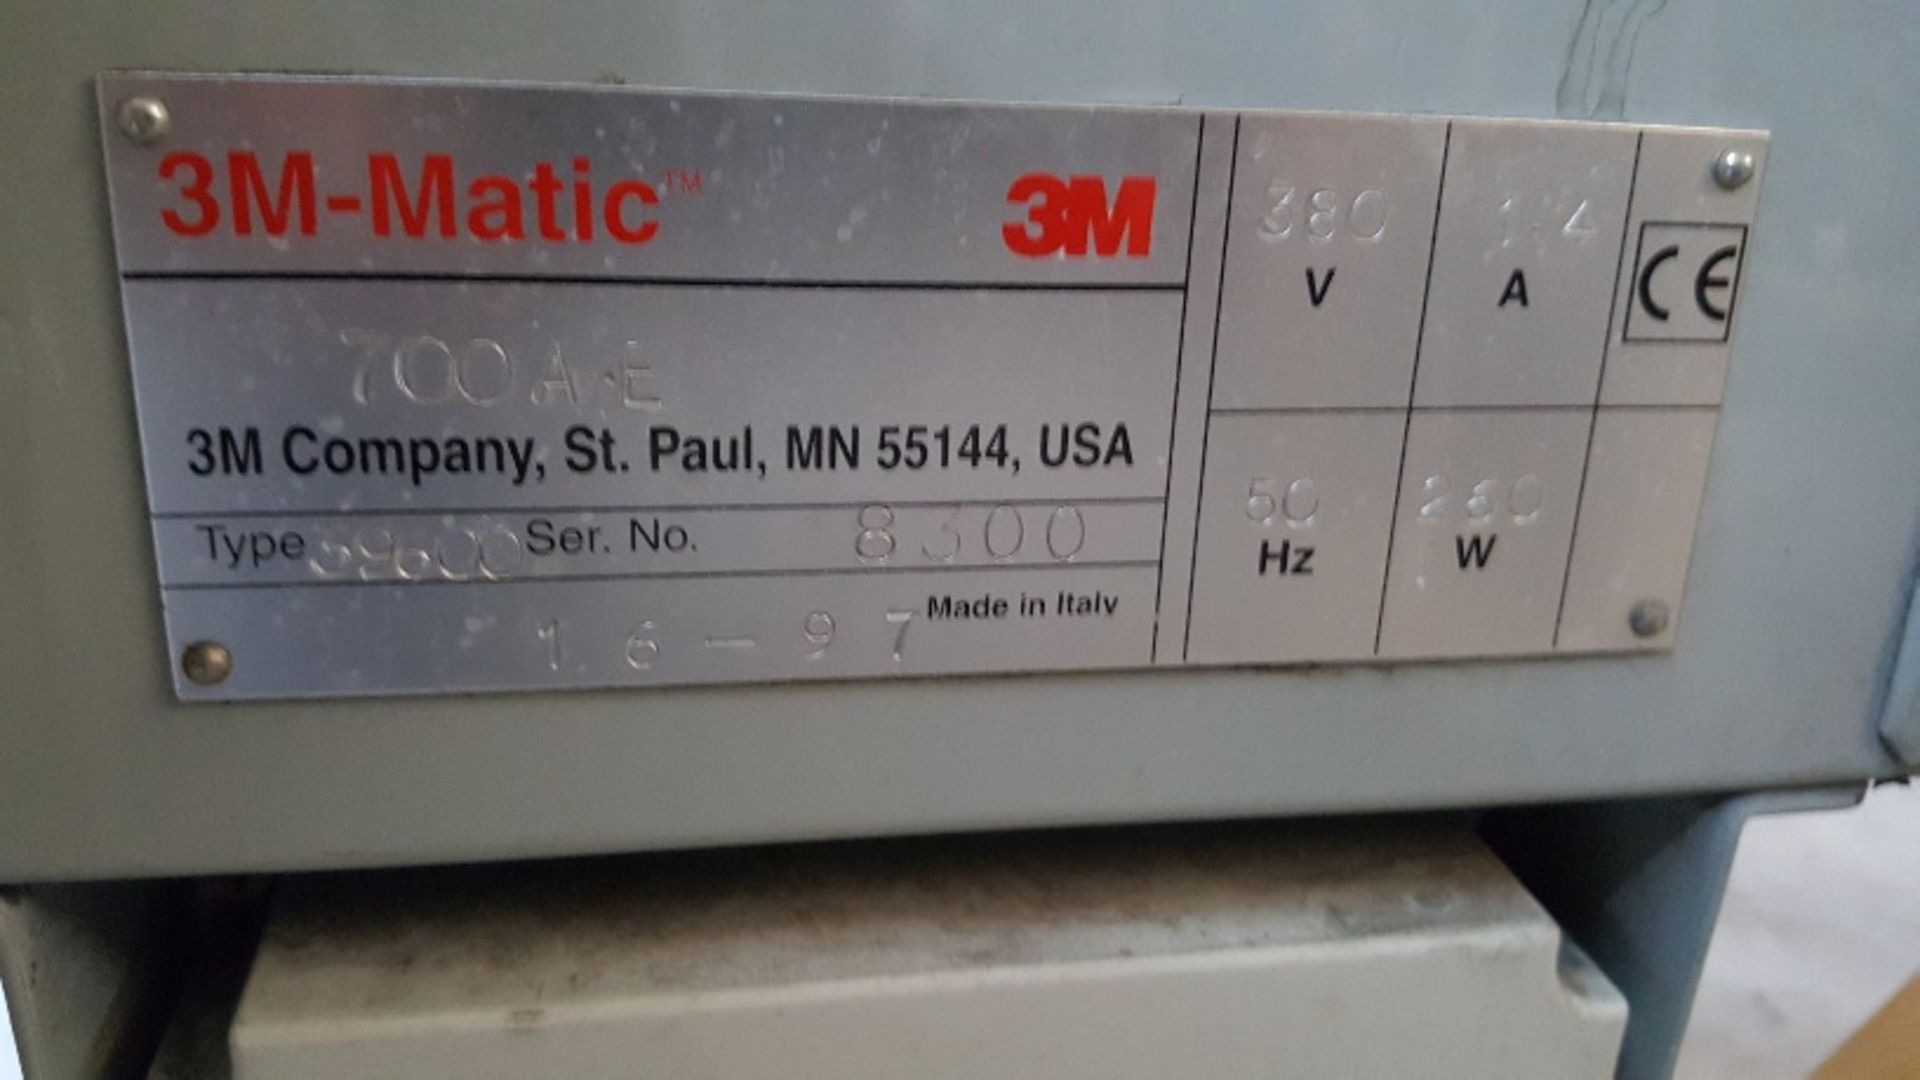 3M-Matic 700AE ADJUSTABLE CASE/BOX SEALER, serial no. 8300, year of manufacture 1997, top and bottom - Image 3 of 4